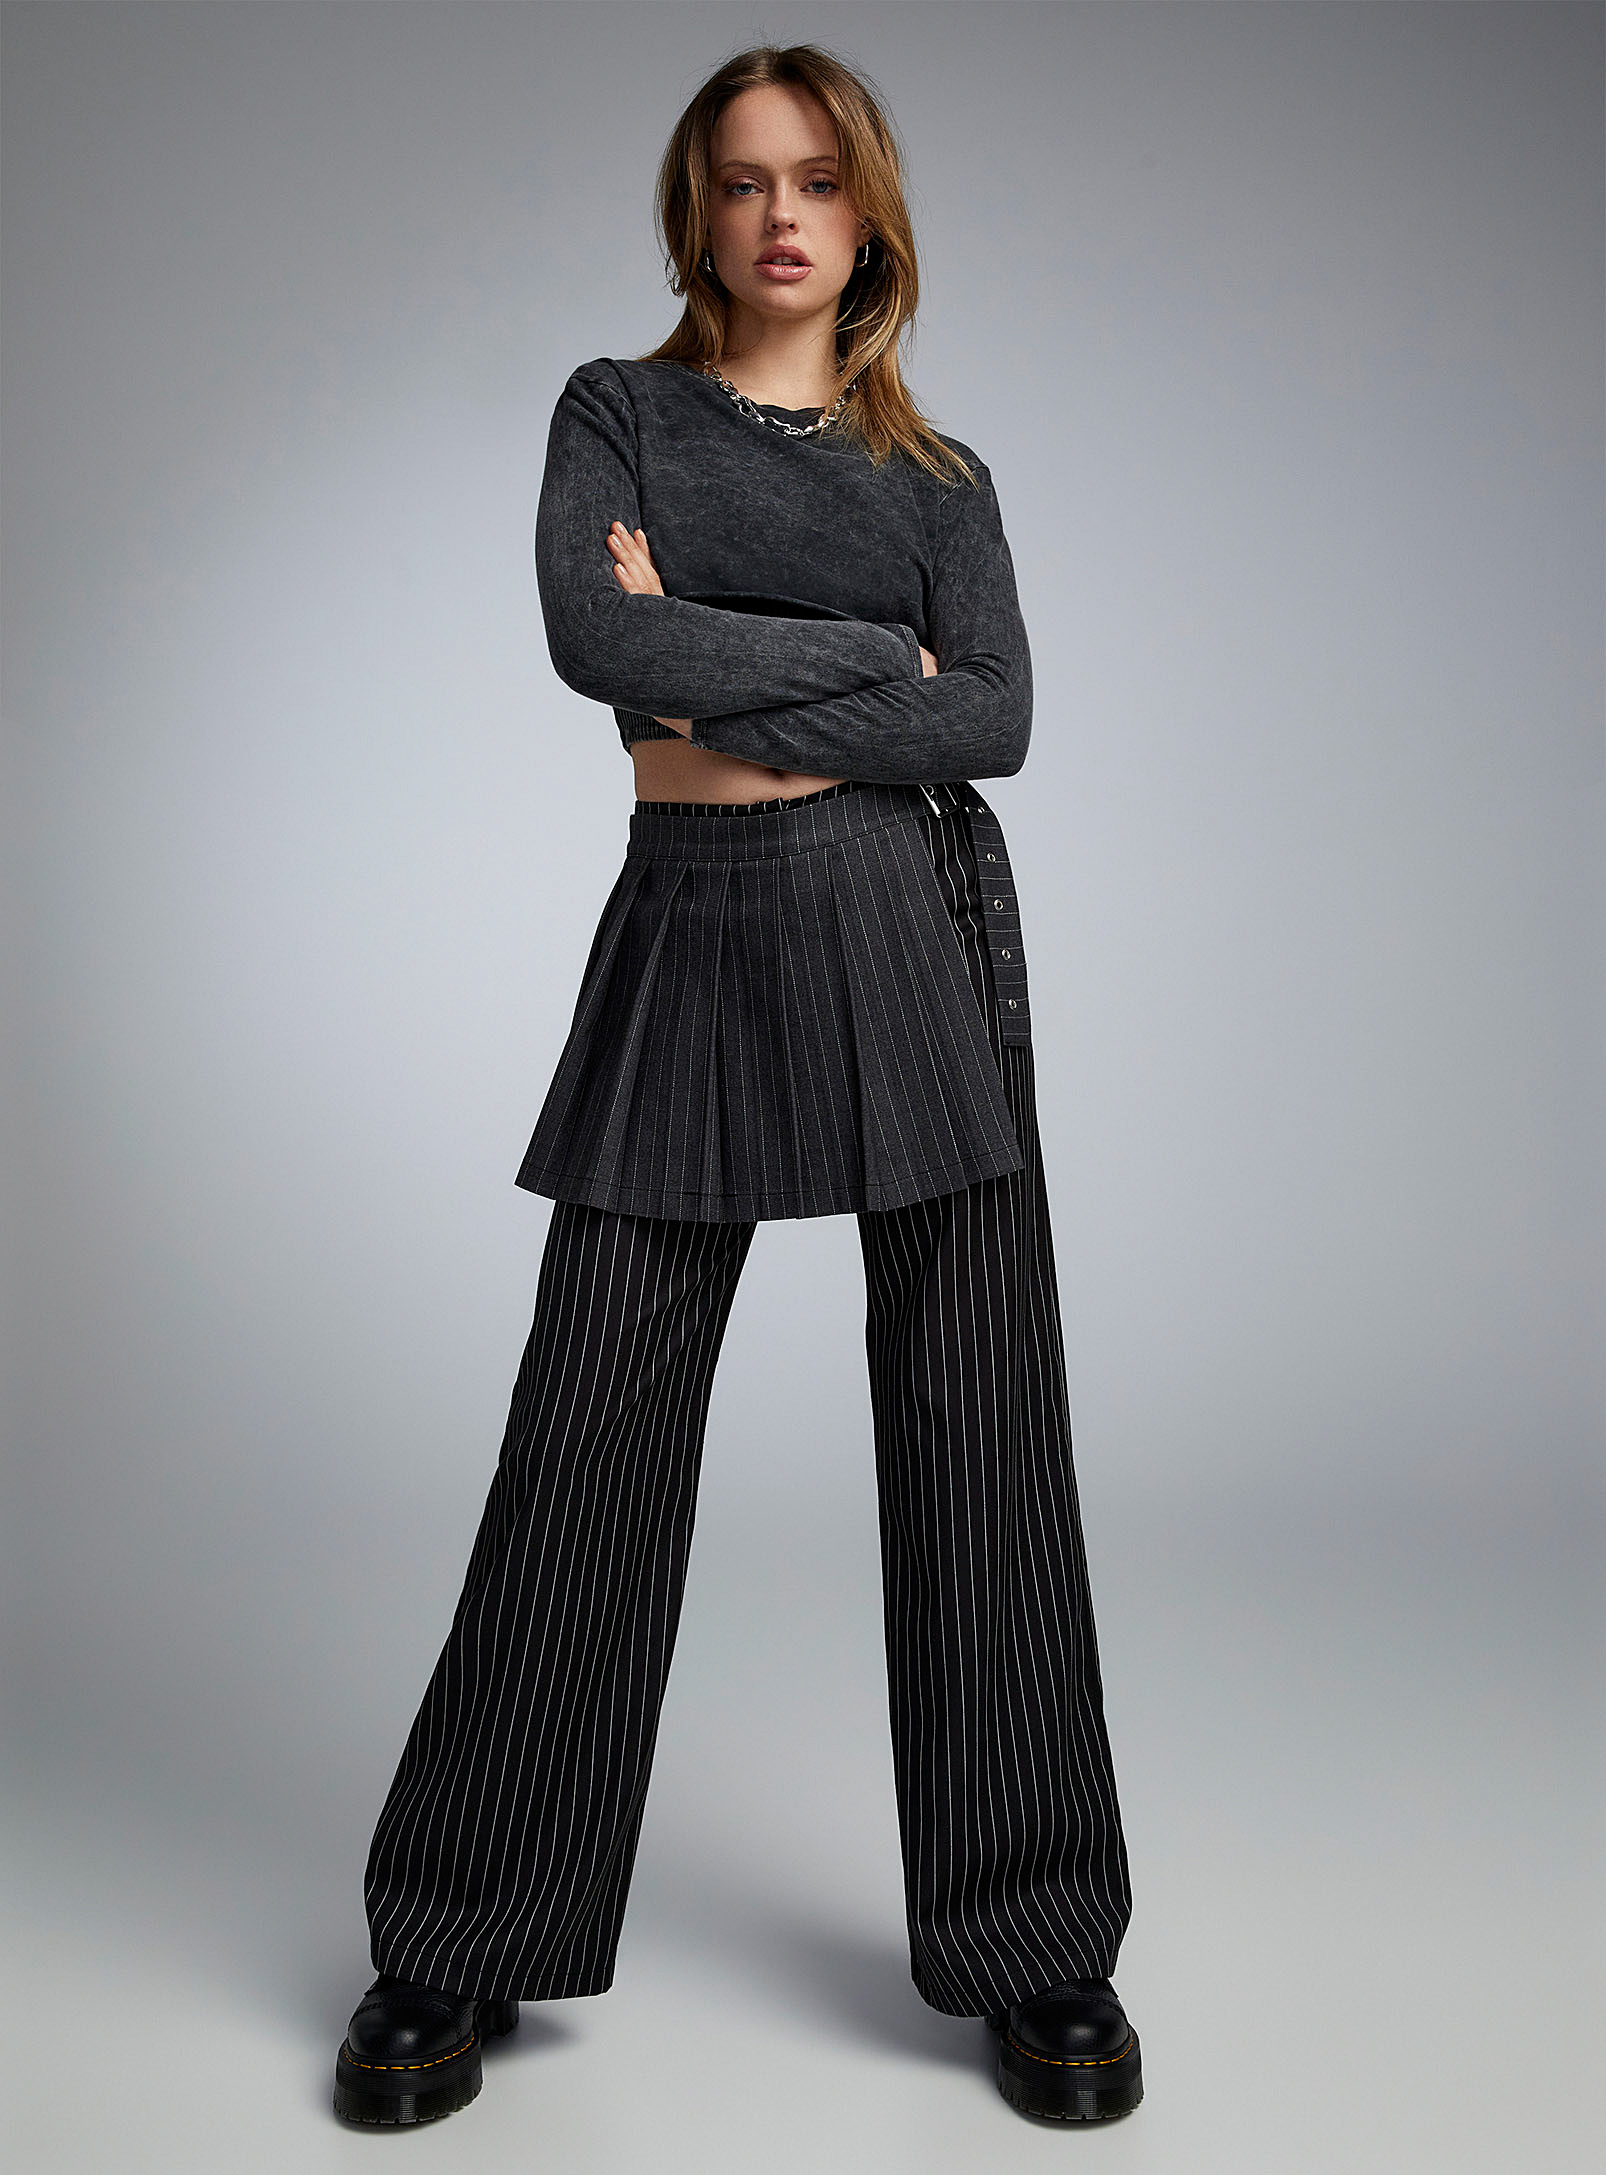 The Ragged Priest Striped Skirt Pant In Patterned Black